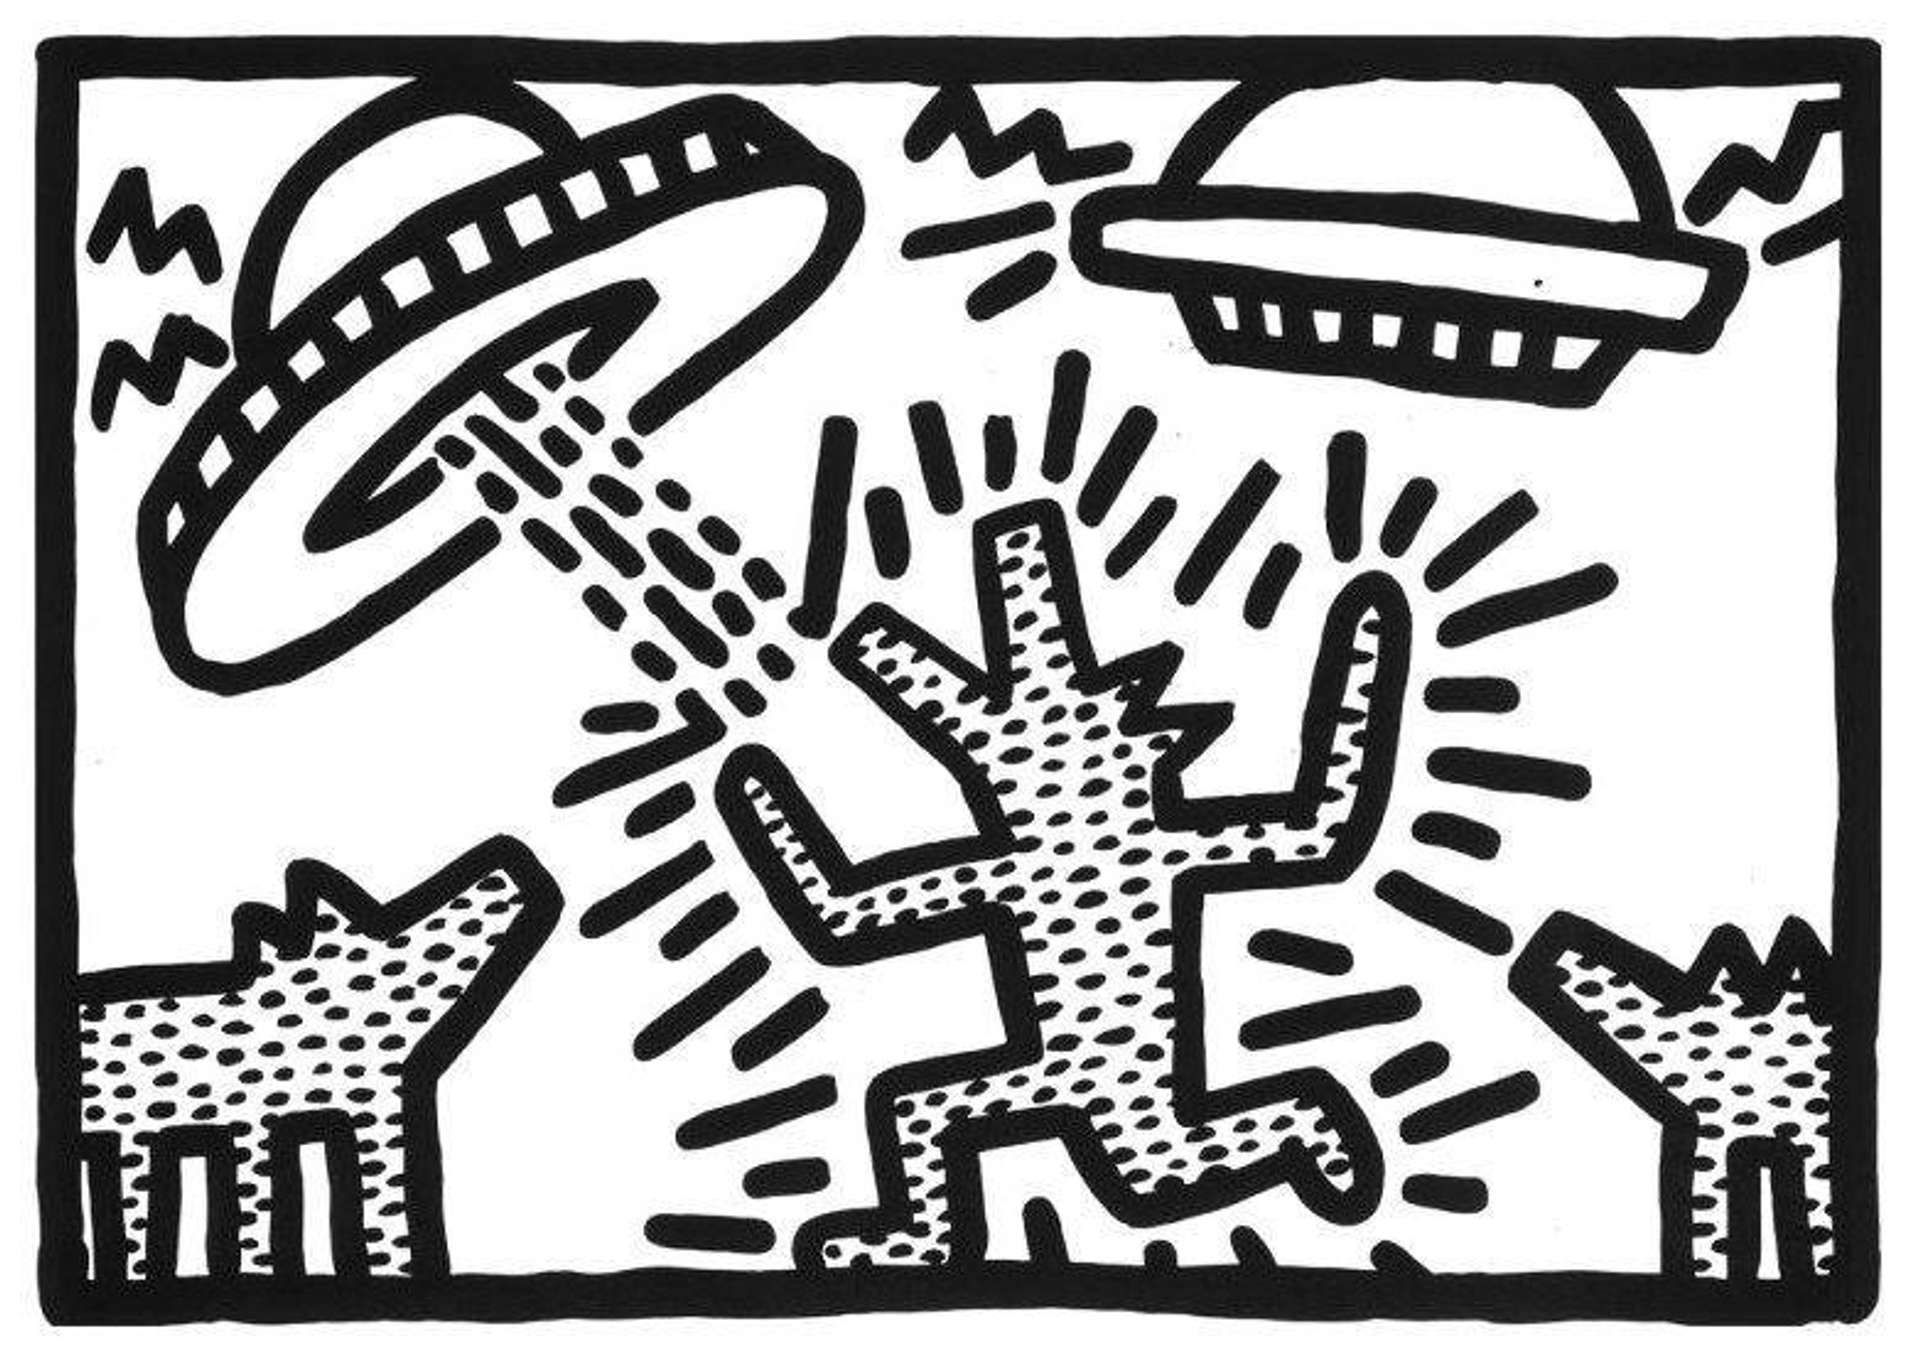 Plate I, Untitled 1 - 6 - Signed Print by Keith Haring 1982 - MyArtBroker